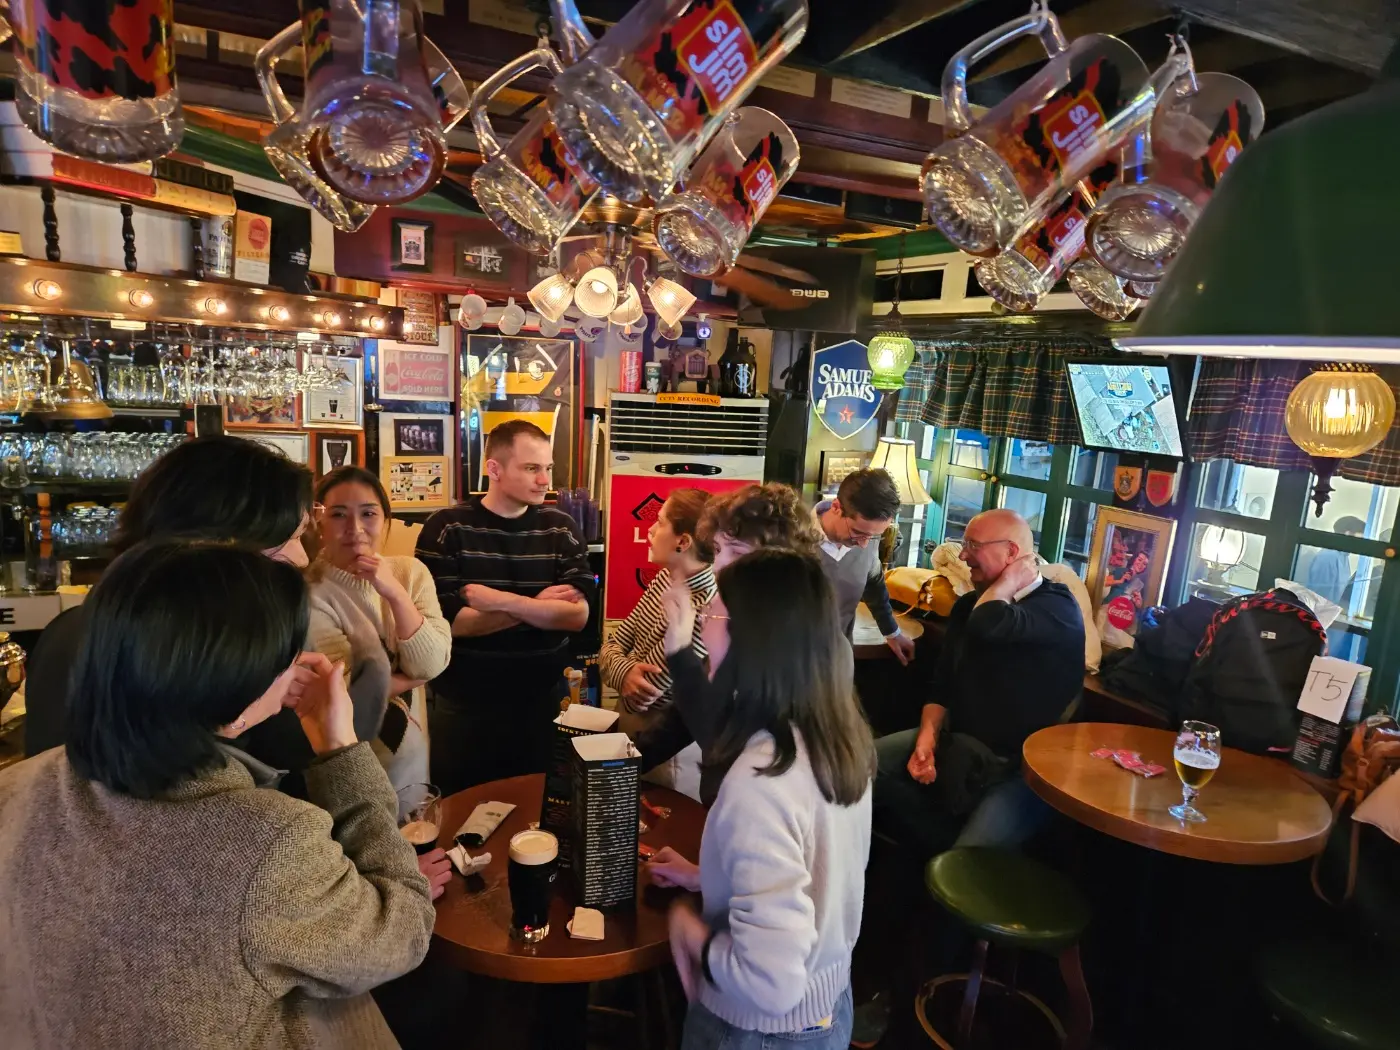 Group of people standing in a pub during an event organized by the Belgian Korean Business Forum, BKBF